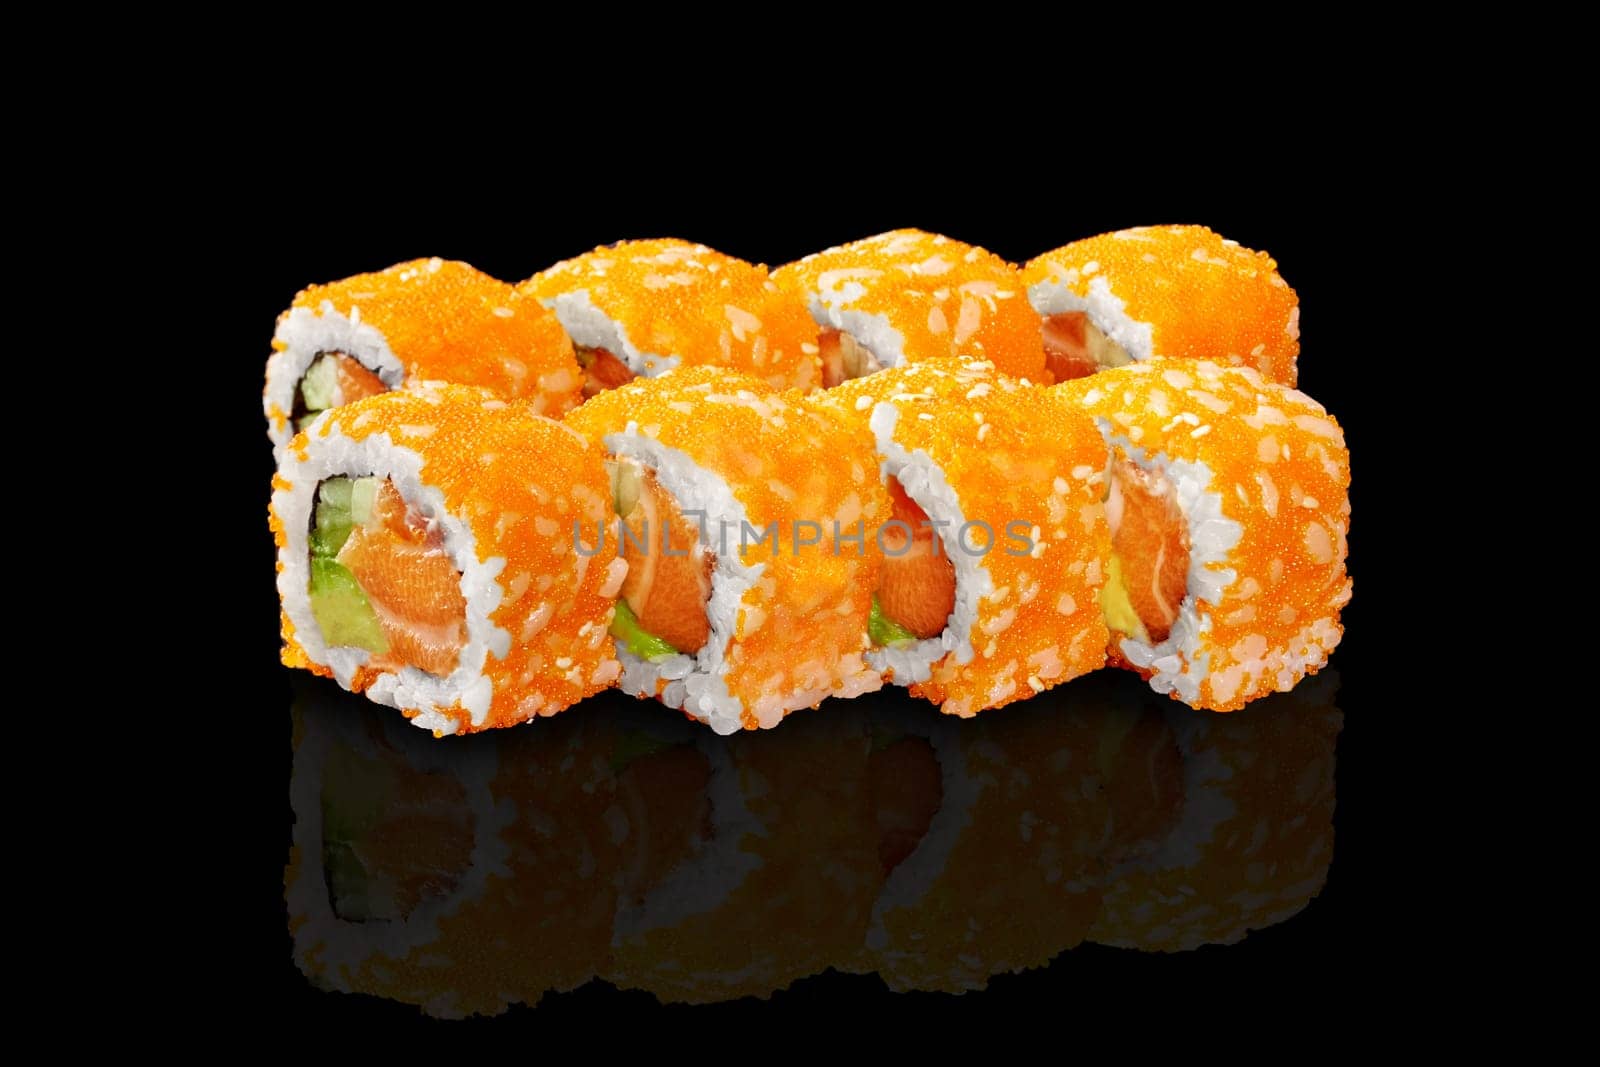 Classic California rolls with raw salmon, avocado and cucumbers coated with vibrant orange tobiko roe presented against reflective black background. Sushi bar menu